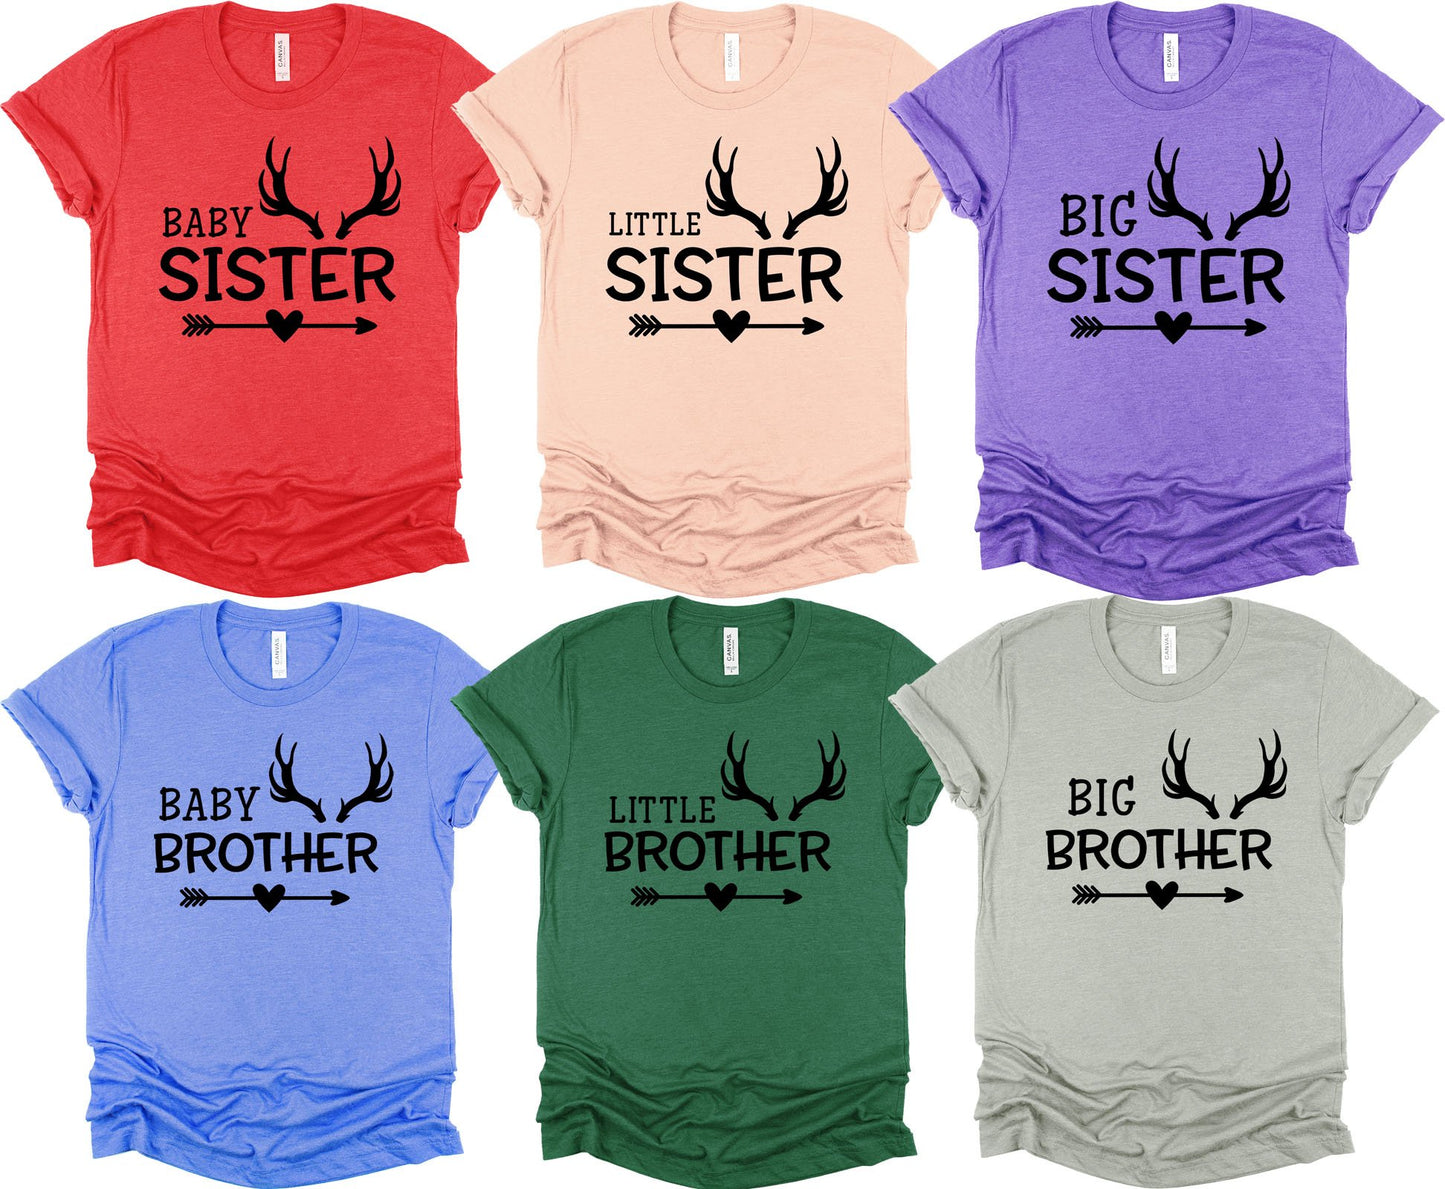 Baby Sister Graphic Tee Graphic Tee